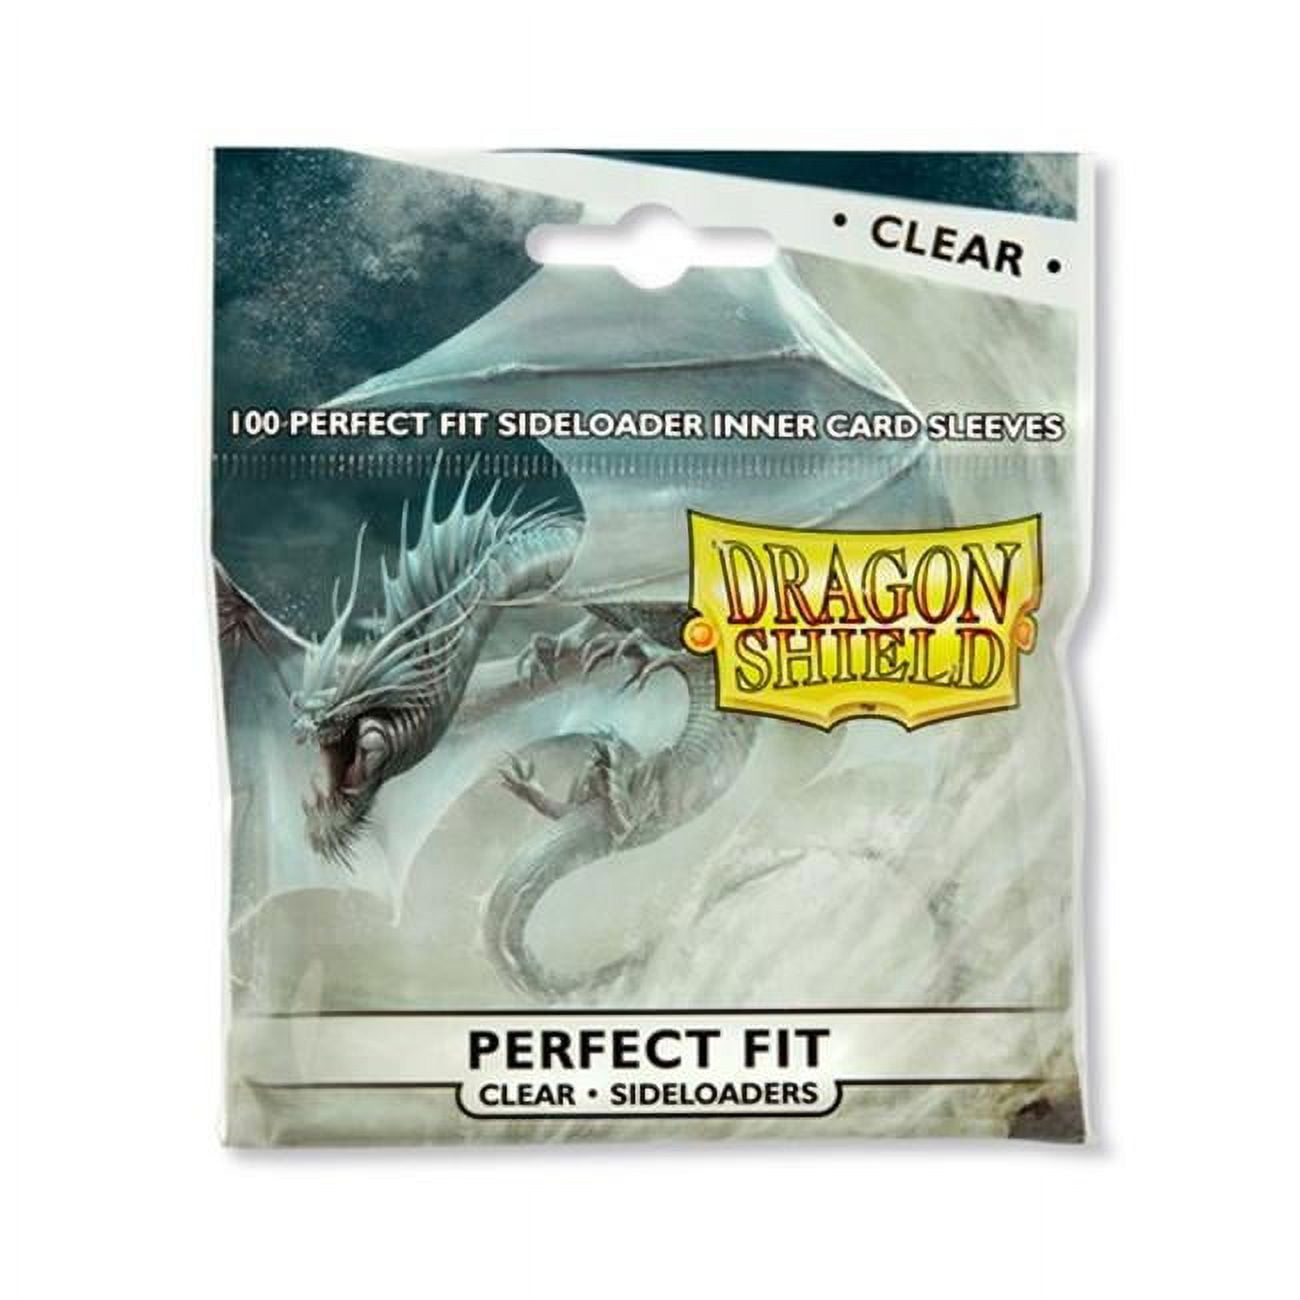 Atm13101 Dragon Shield Perfect Fit Side-loading Sleeves, Clear - 100 Count